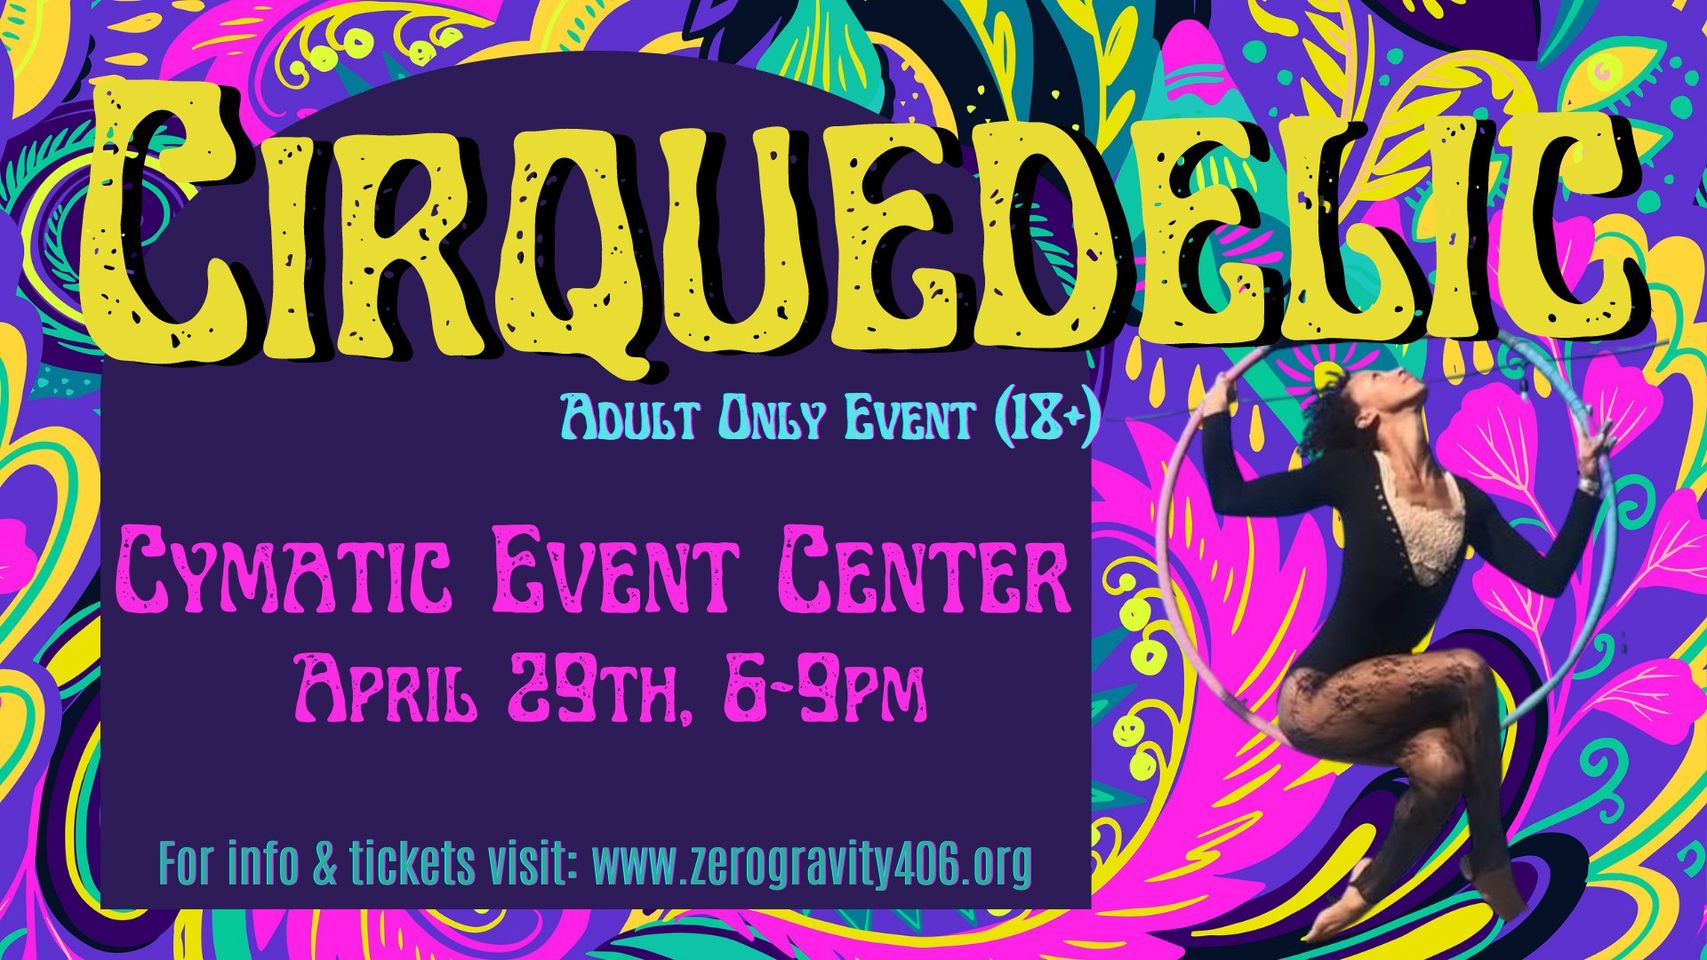 Cirquedelic fundraiser for Zero Gravity at 6:00 pm Saturday, April 29 at Cymatic Event Center in Missoula